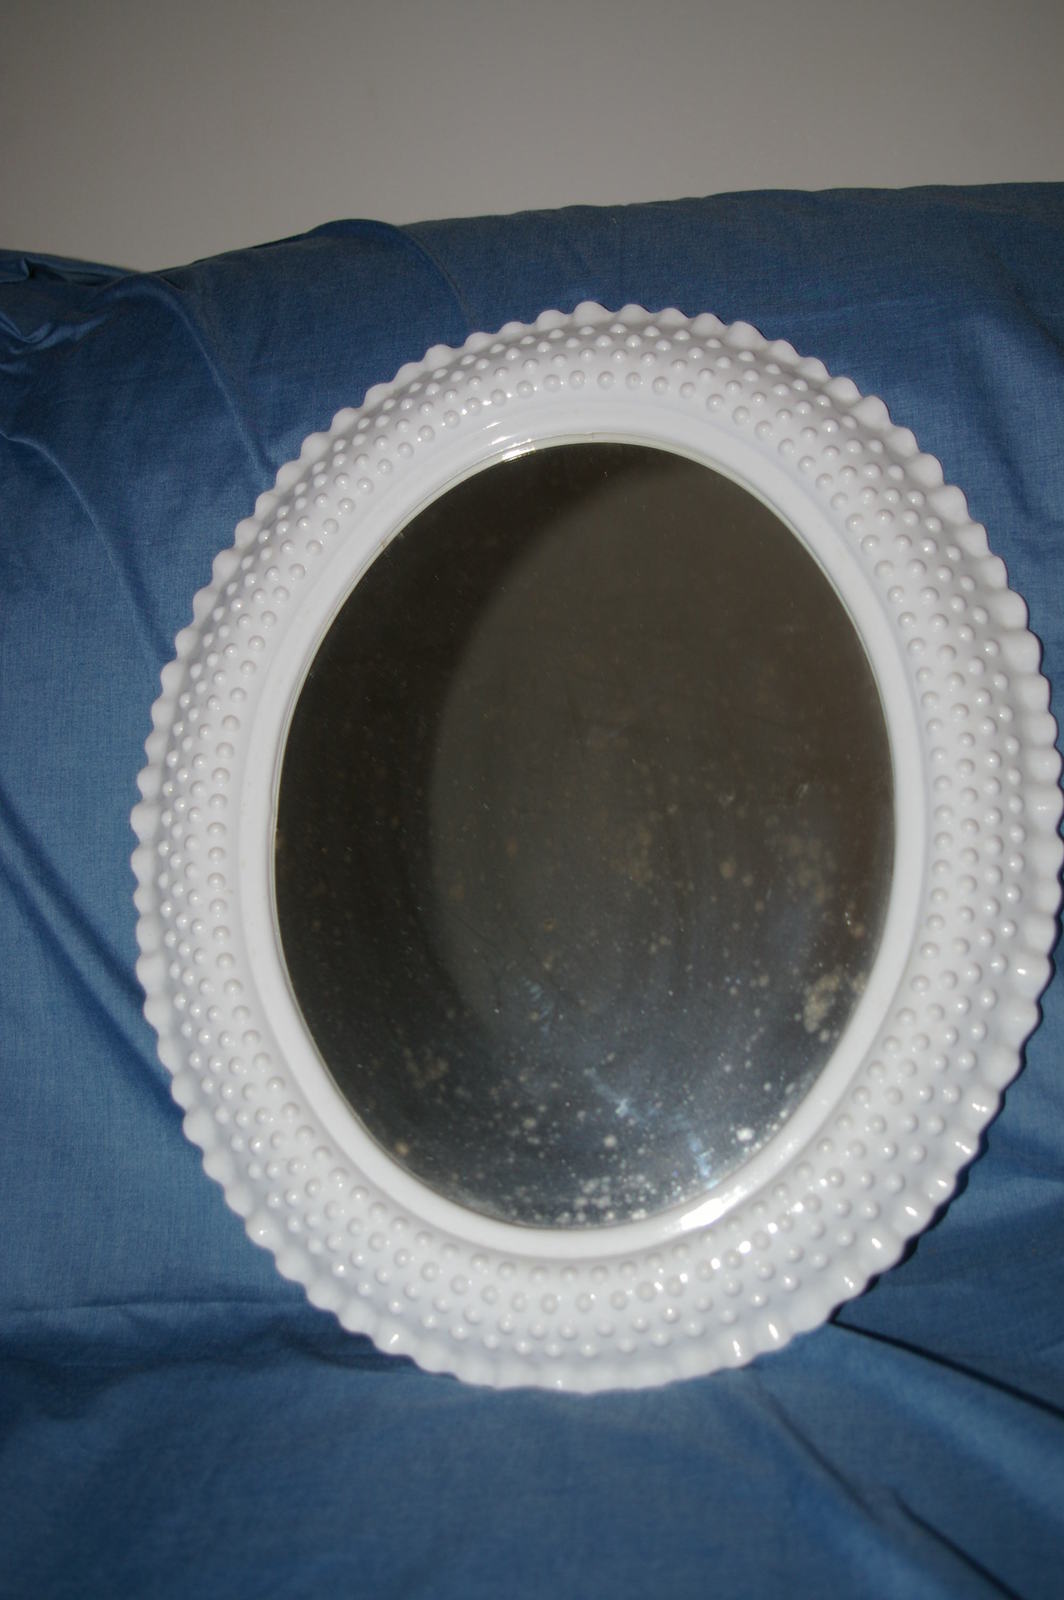 Home Interiors & Gifts Vintage 1984 Burwood Hobnail Oval Mirror White 2657 Homco - $25.00